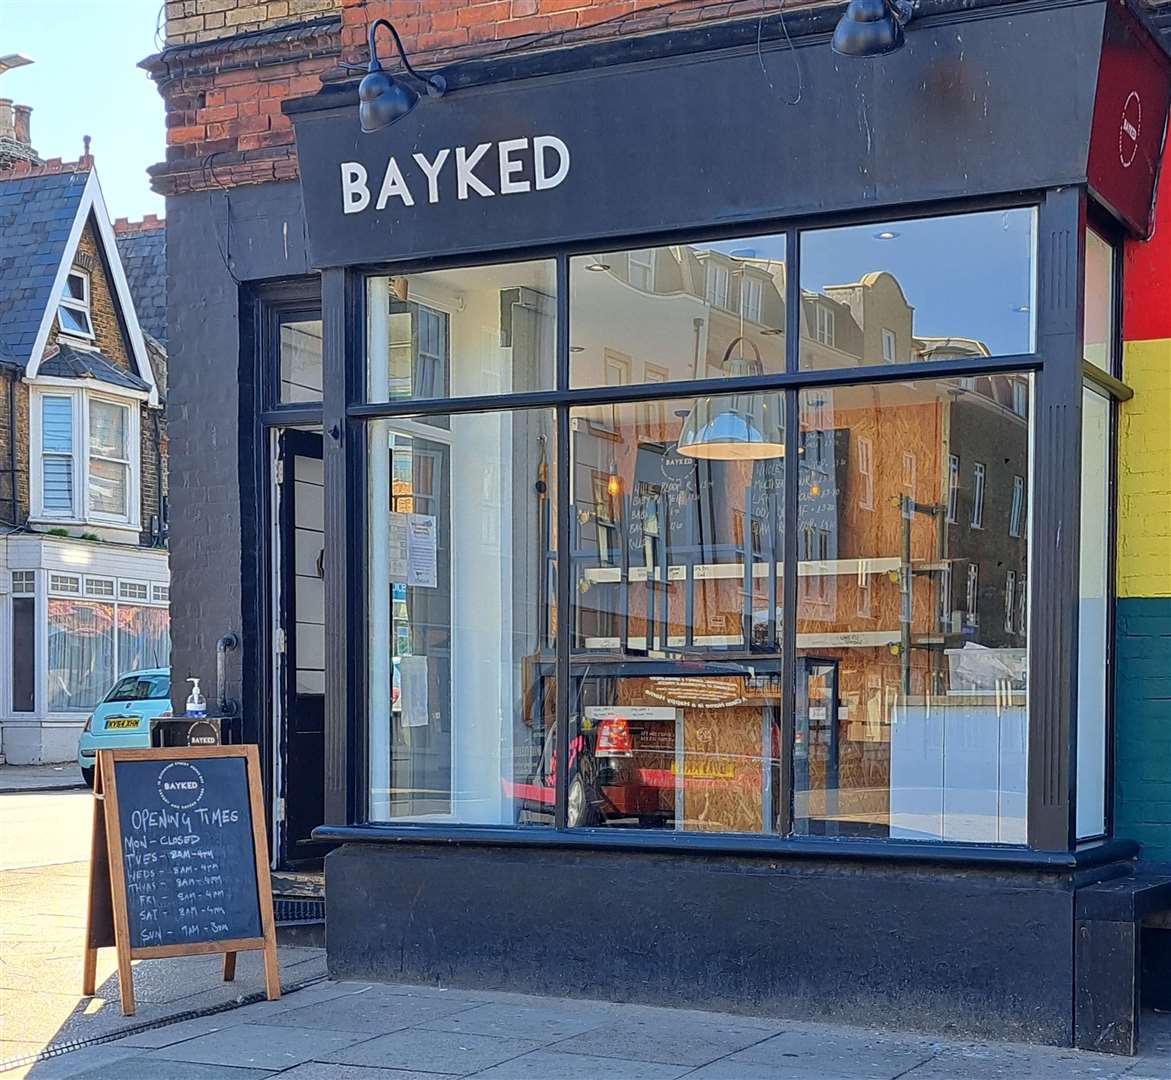 Bayked in Herne Bay is described as "special" by punters